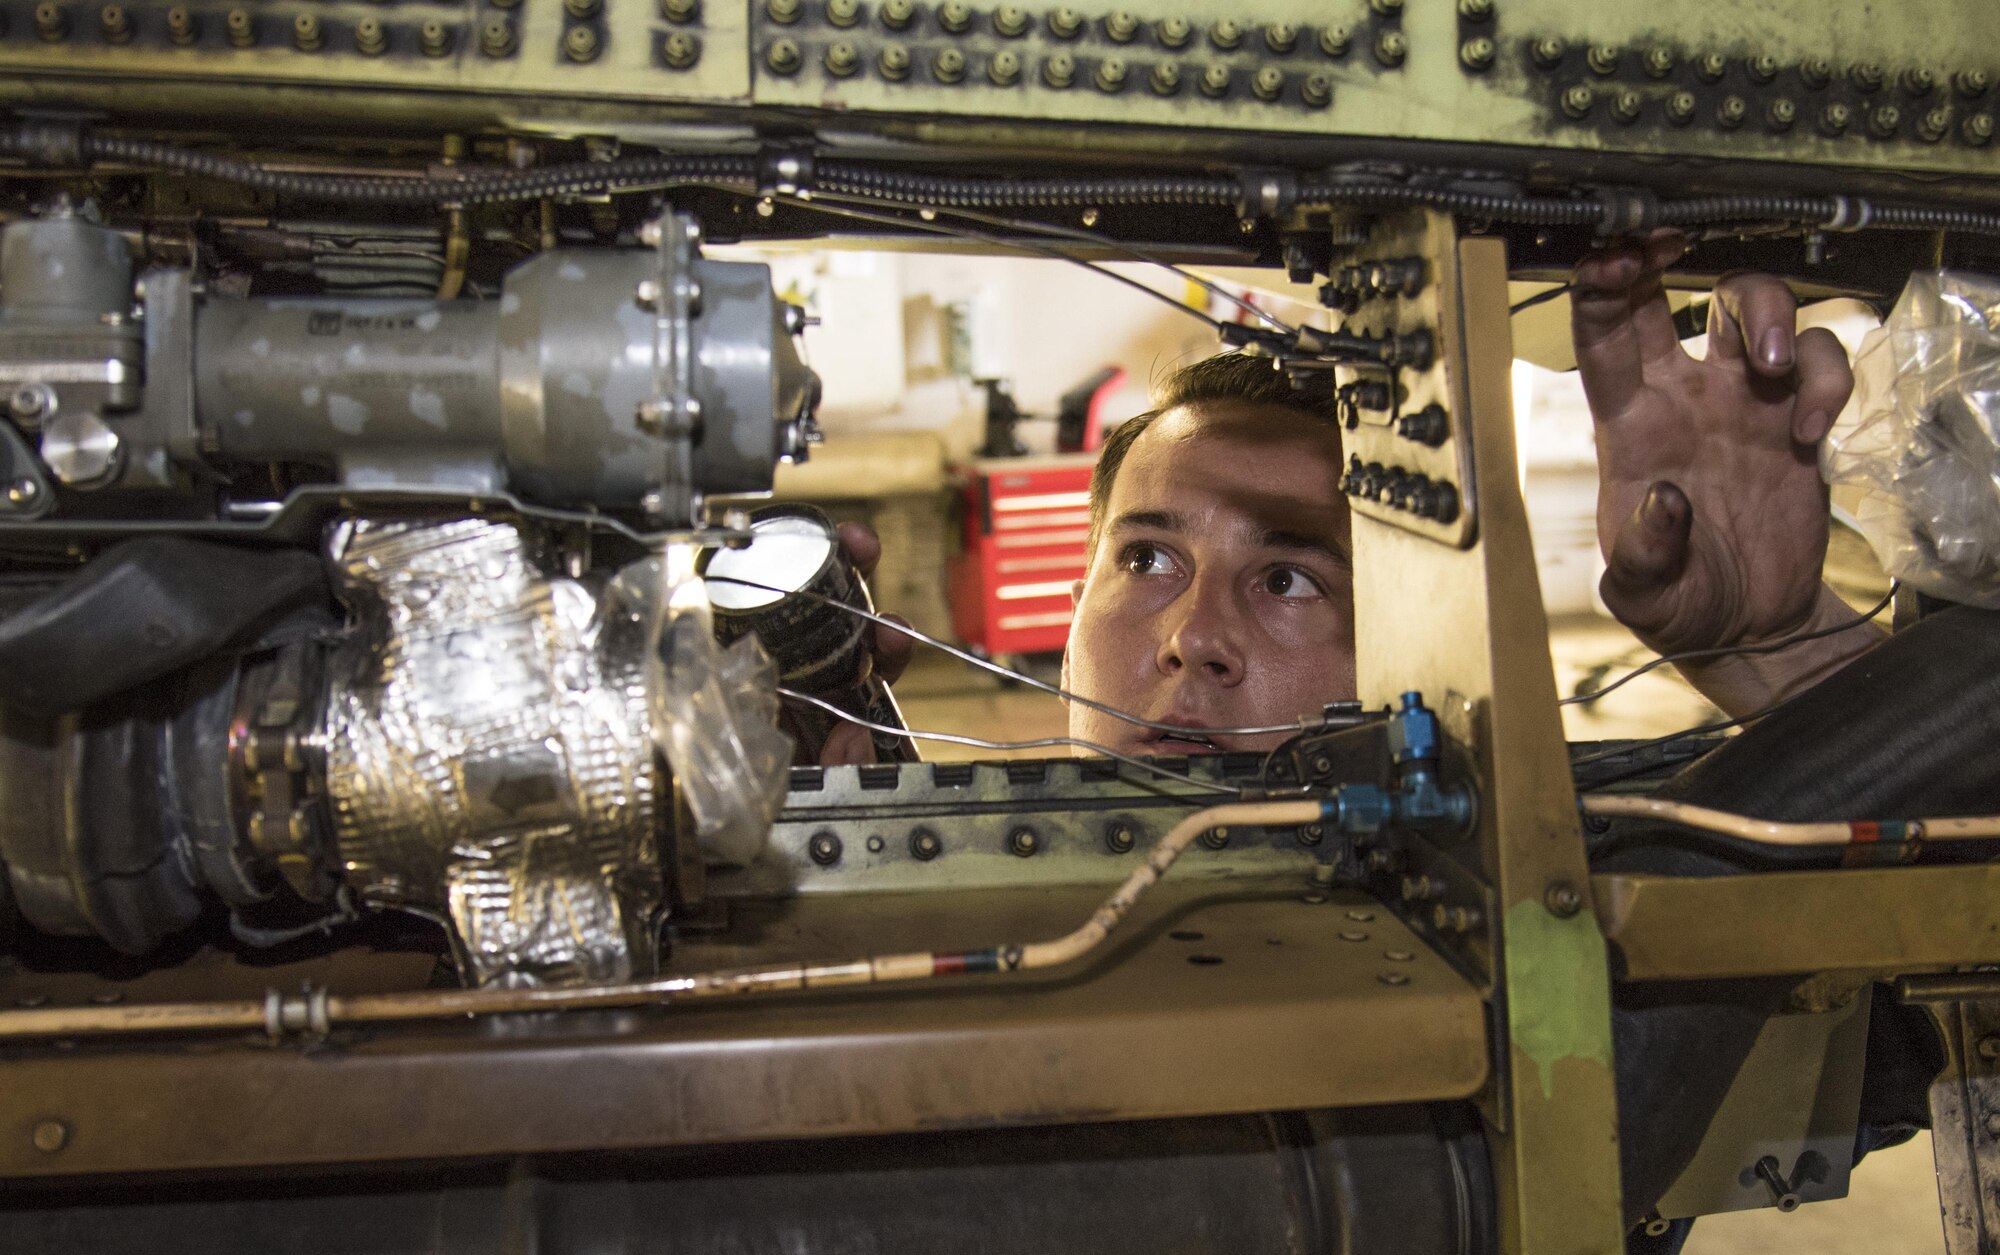 U.S. Air Force Staff Sgt. Beau Blackburn, a dedicated crew chief with the 35th Aircraft Maintenance Squadron, shines a flashlight into an F-16 Fighting Falcon at Misawa Air Base, Japan, June 16, 2016. Visibility is a necessary aspect of inspections when maintenance Airmen search throughout an aircraft for parts or damage. Blackburn is from Iona, Idaho. (U.S. Air Force photo by Airman 1st Class Jordyn Fetter)